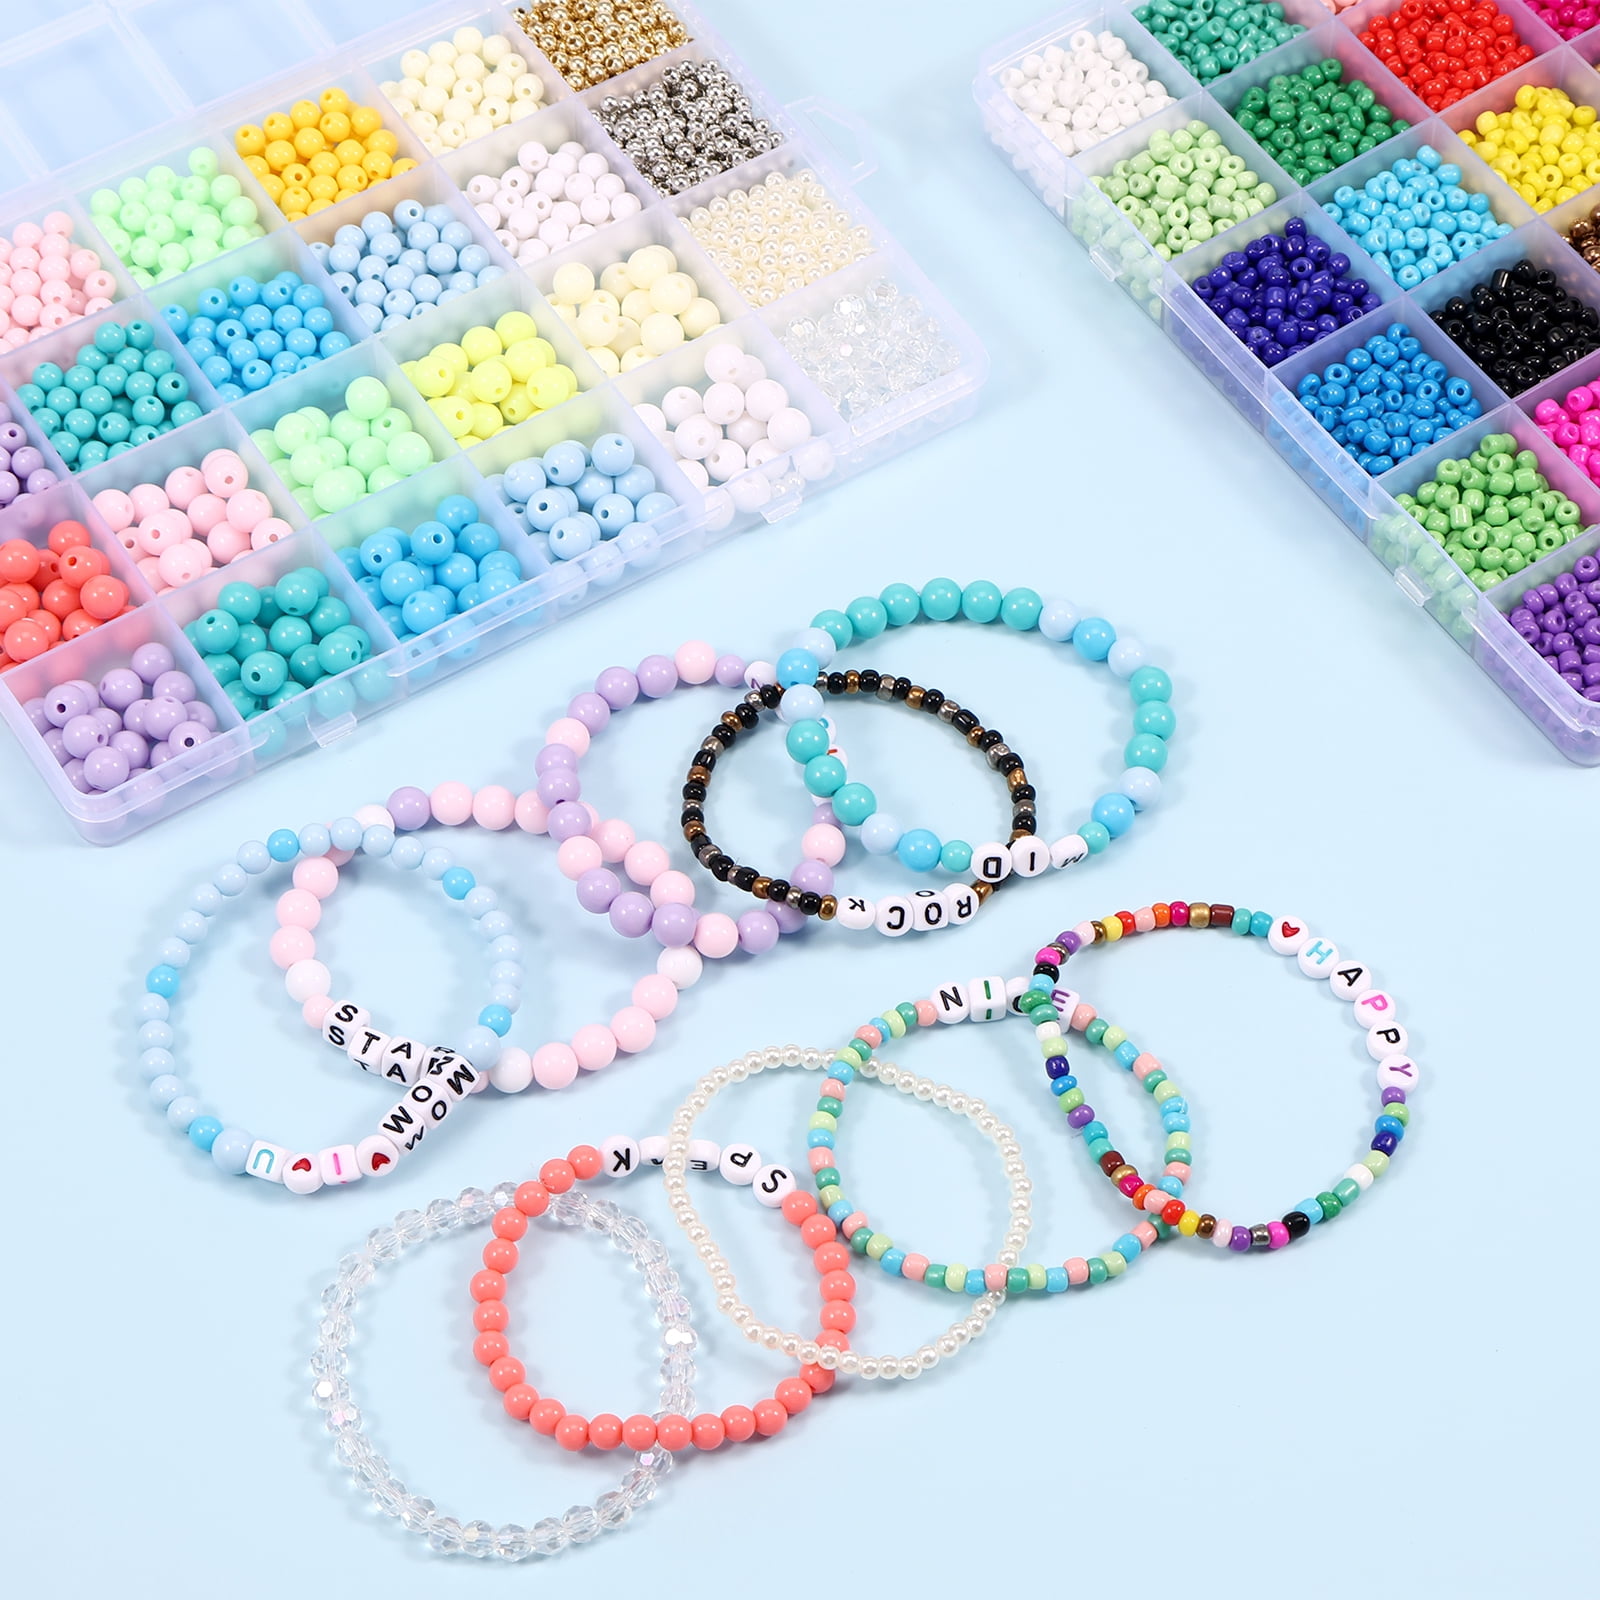 Colorful Candy Acrylic Clay Beaded Bracelets Kid Bracelet Beautiful Fashion  Jewelry For Girls From Fashionstore666, $0.63 | DHgate.Com